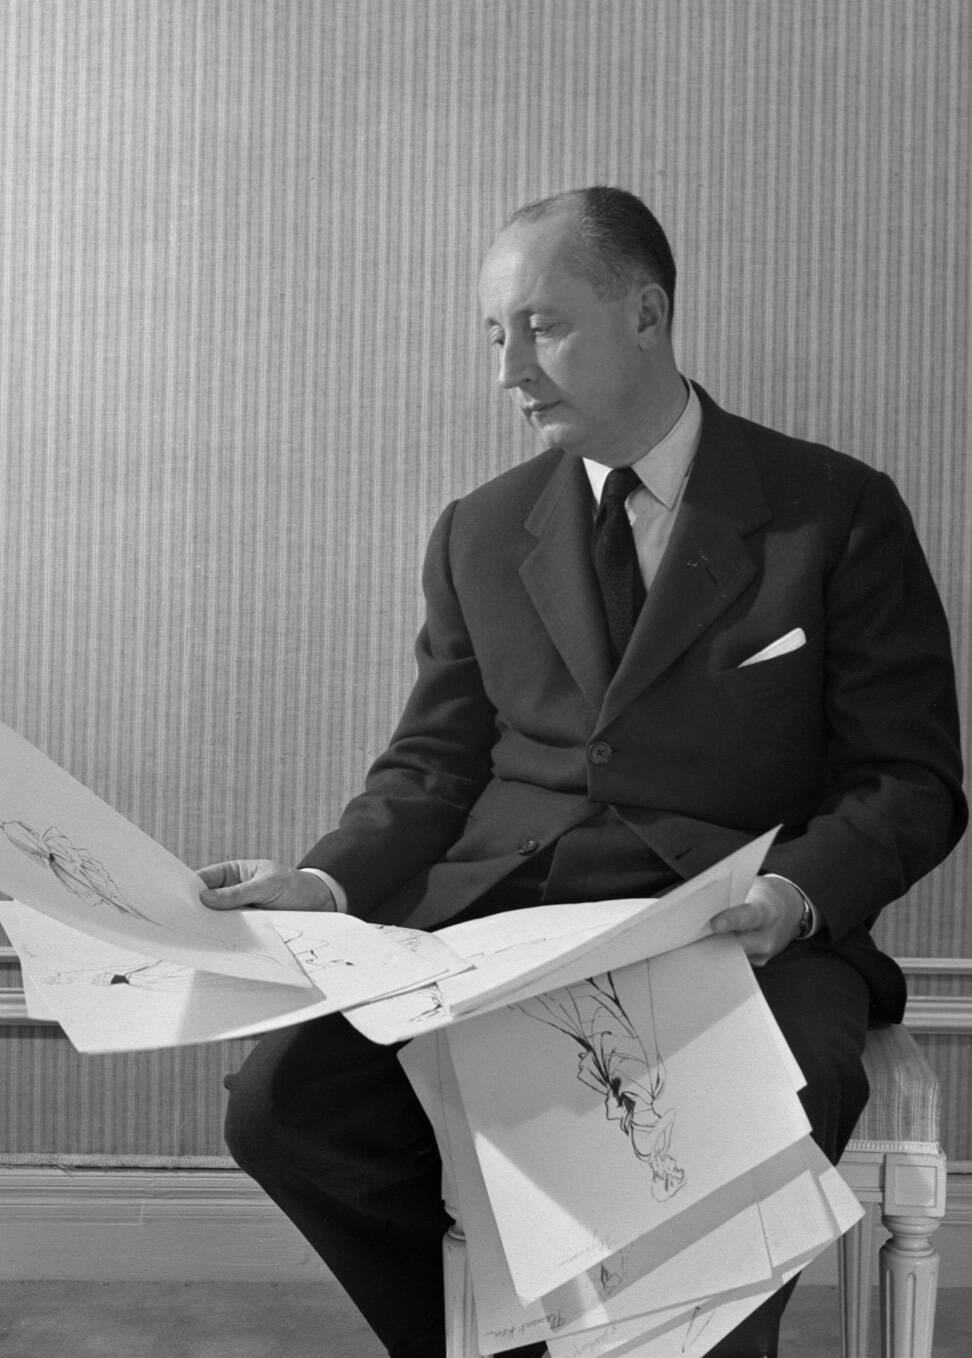 Christian Dior - The Artist of the Fashion World - TechStory